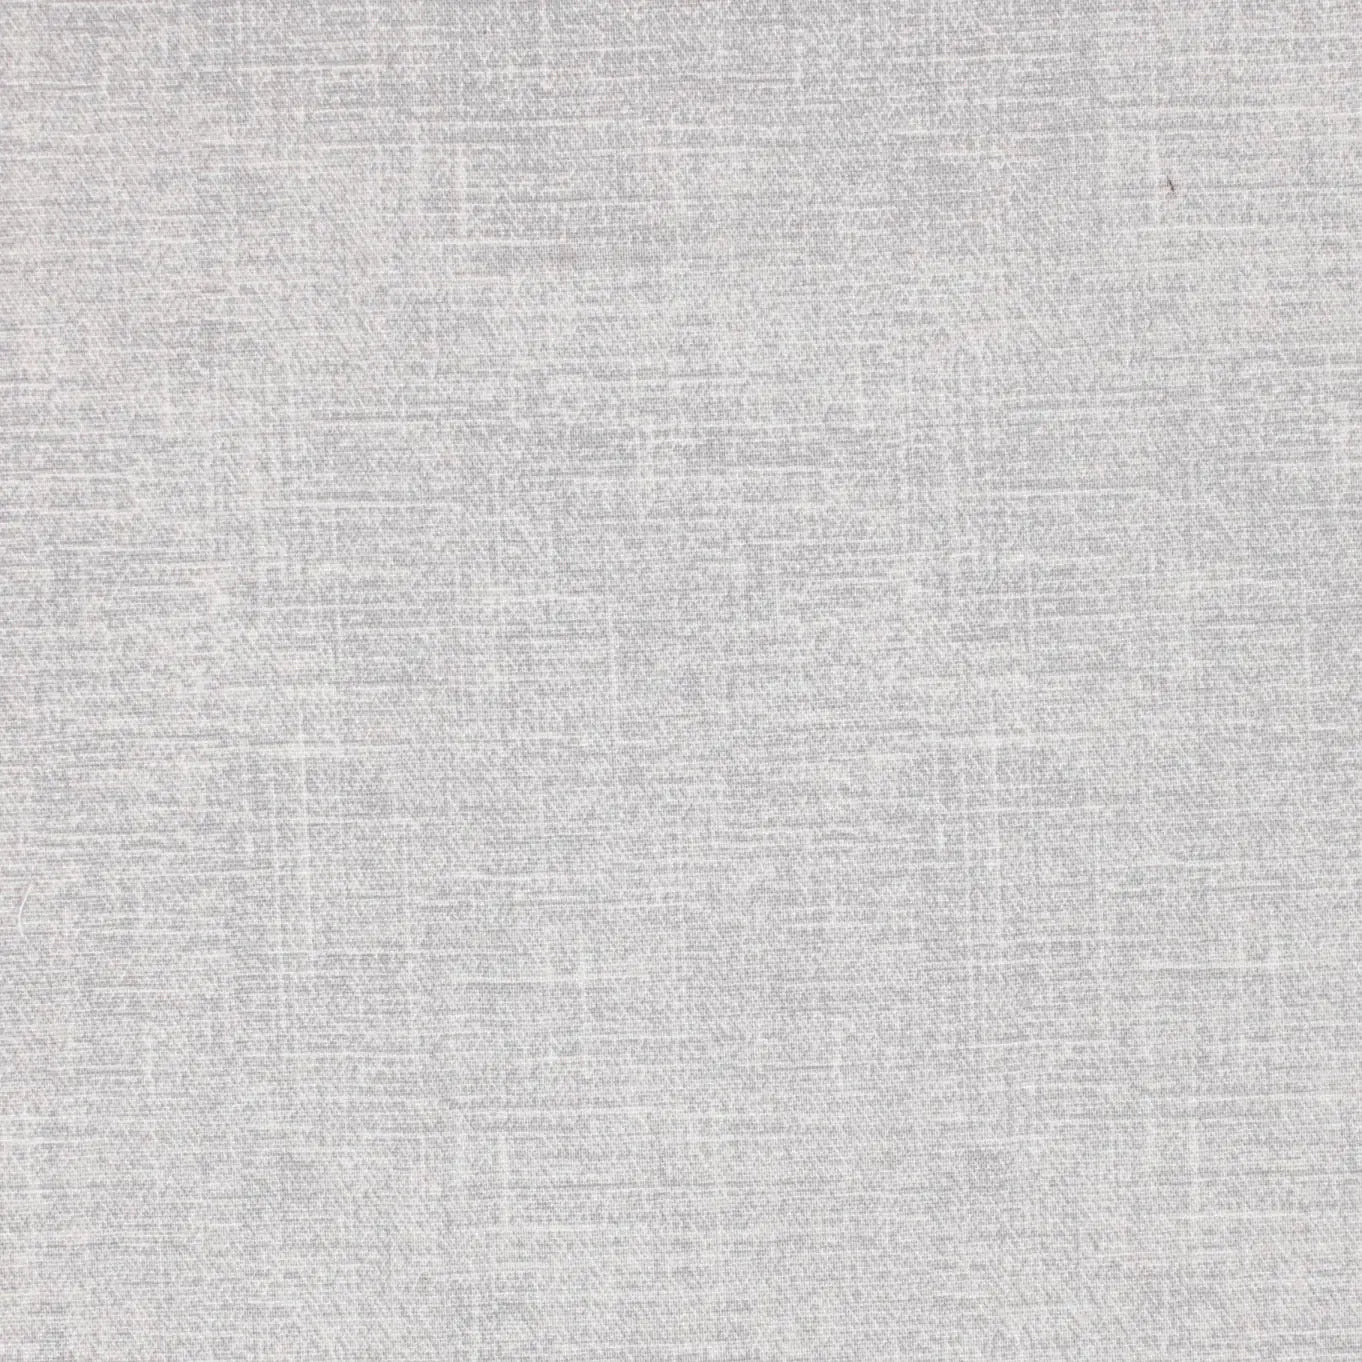 Grey Light Grain of Color Cotton Wideback Fabric ( 1 7/8 yard pack )